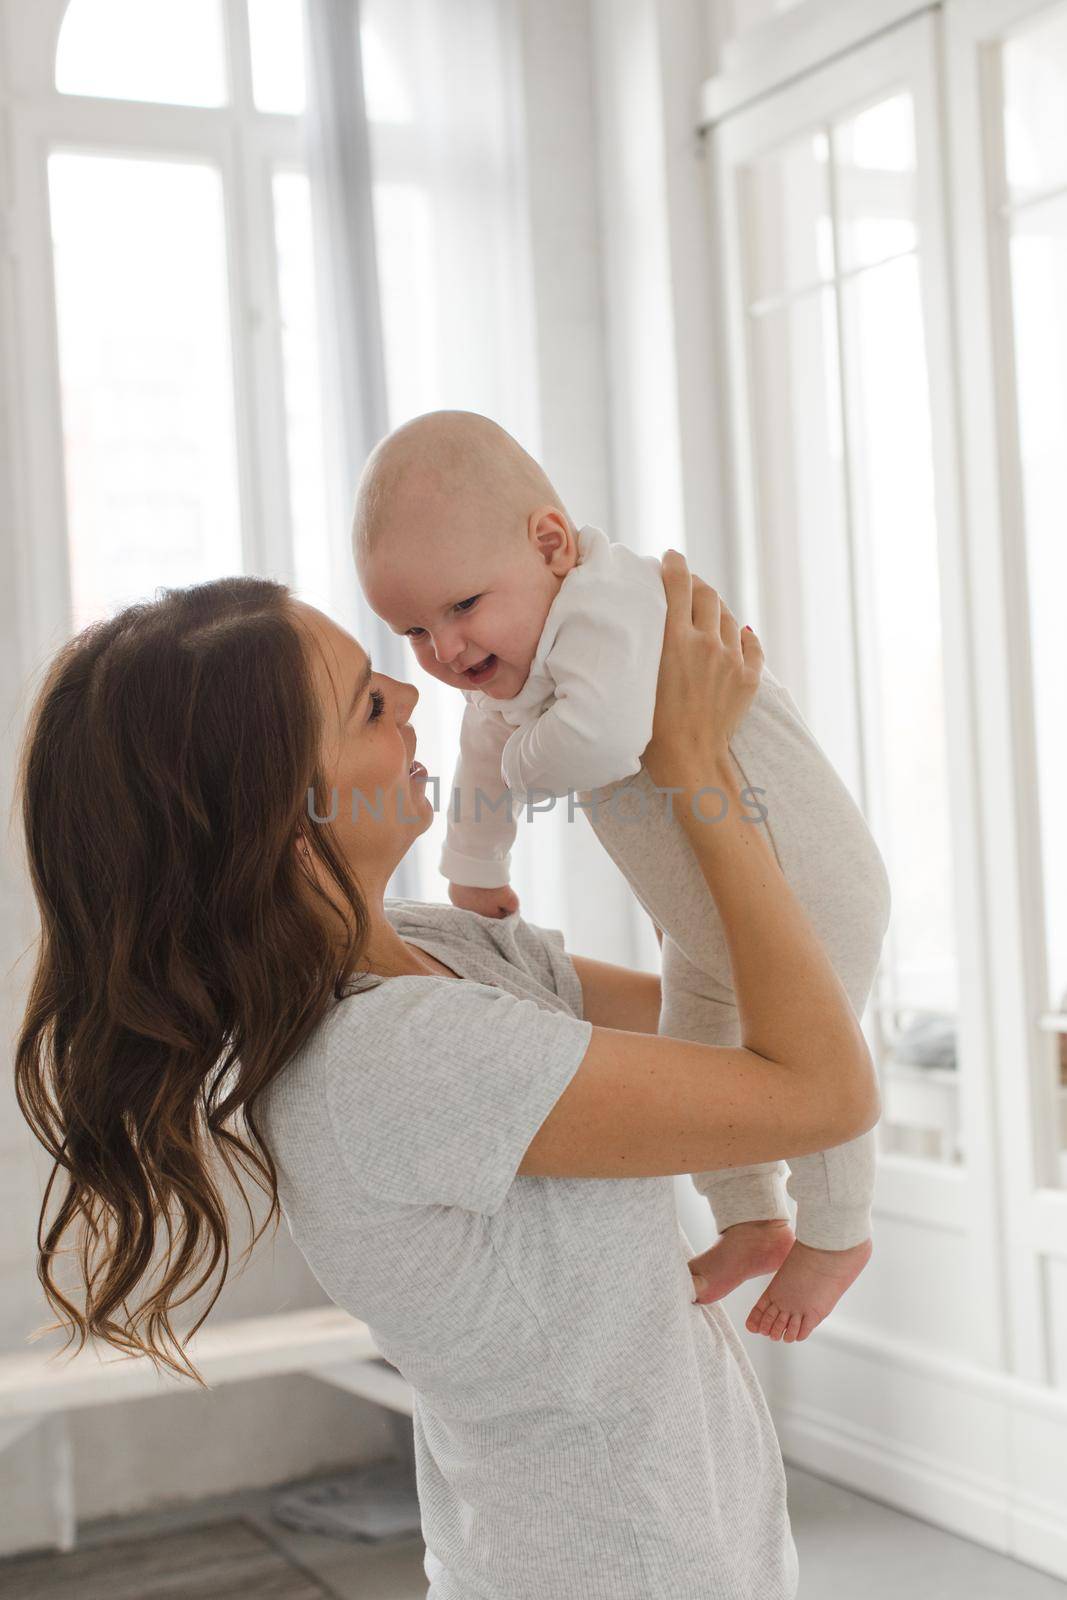 Cheerful woman playing with adorable infant child.